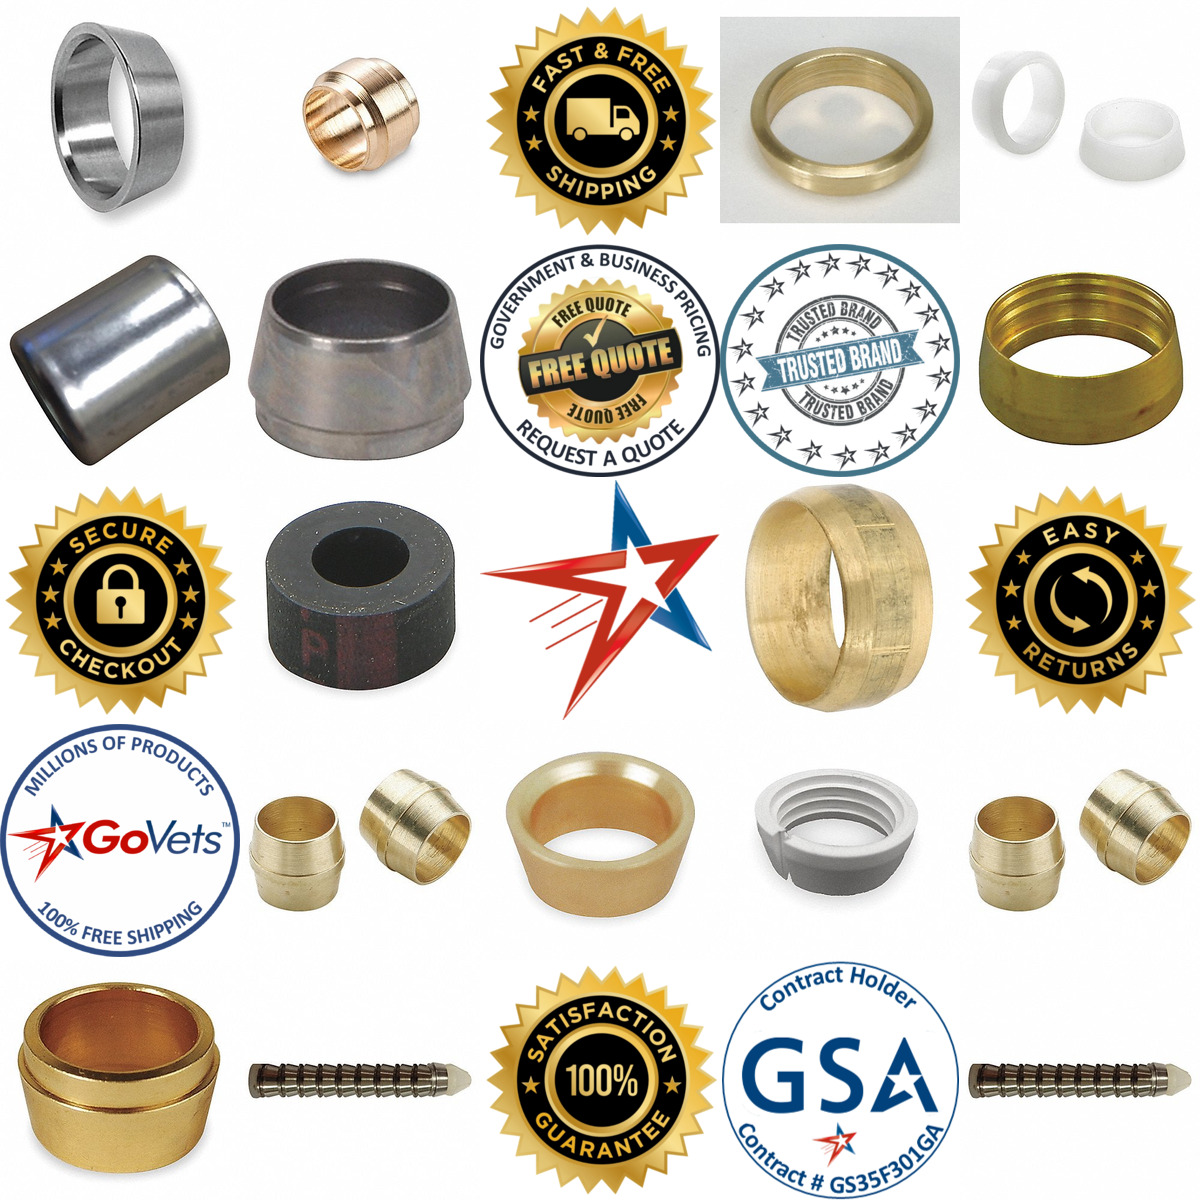 A selection of Compression Fitting Ferrules and Sleeves products on GoVets